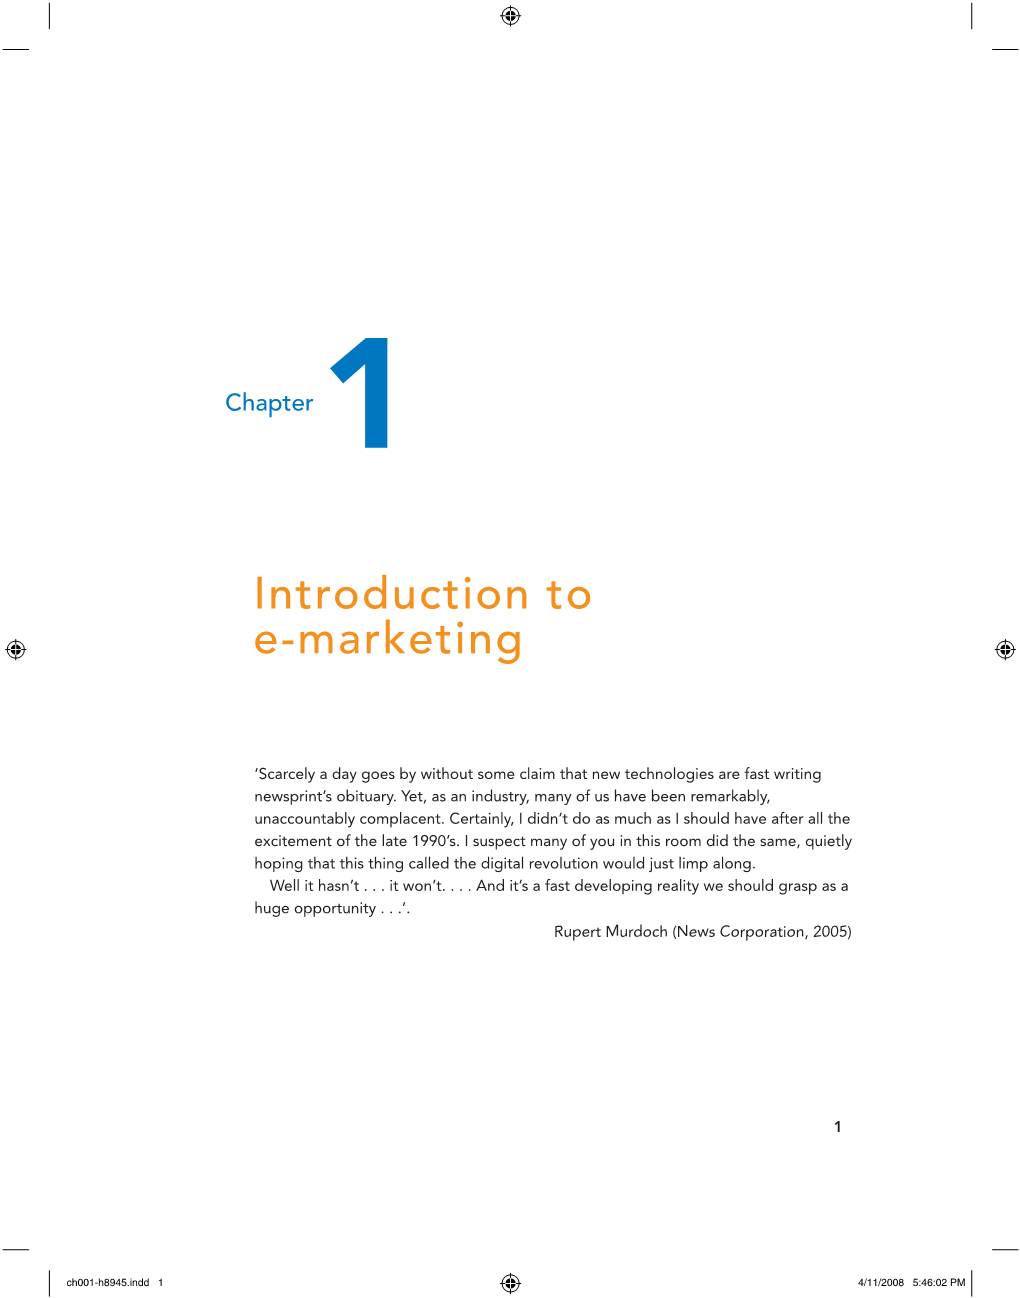 Introduction to E-Marketing